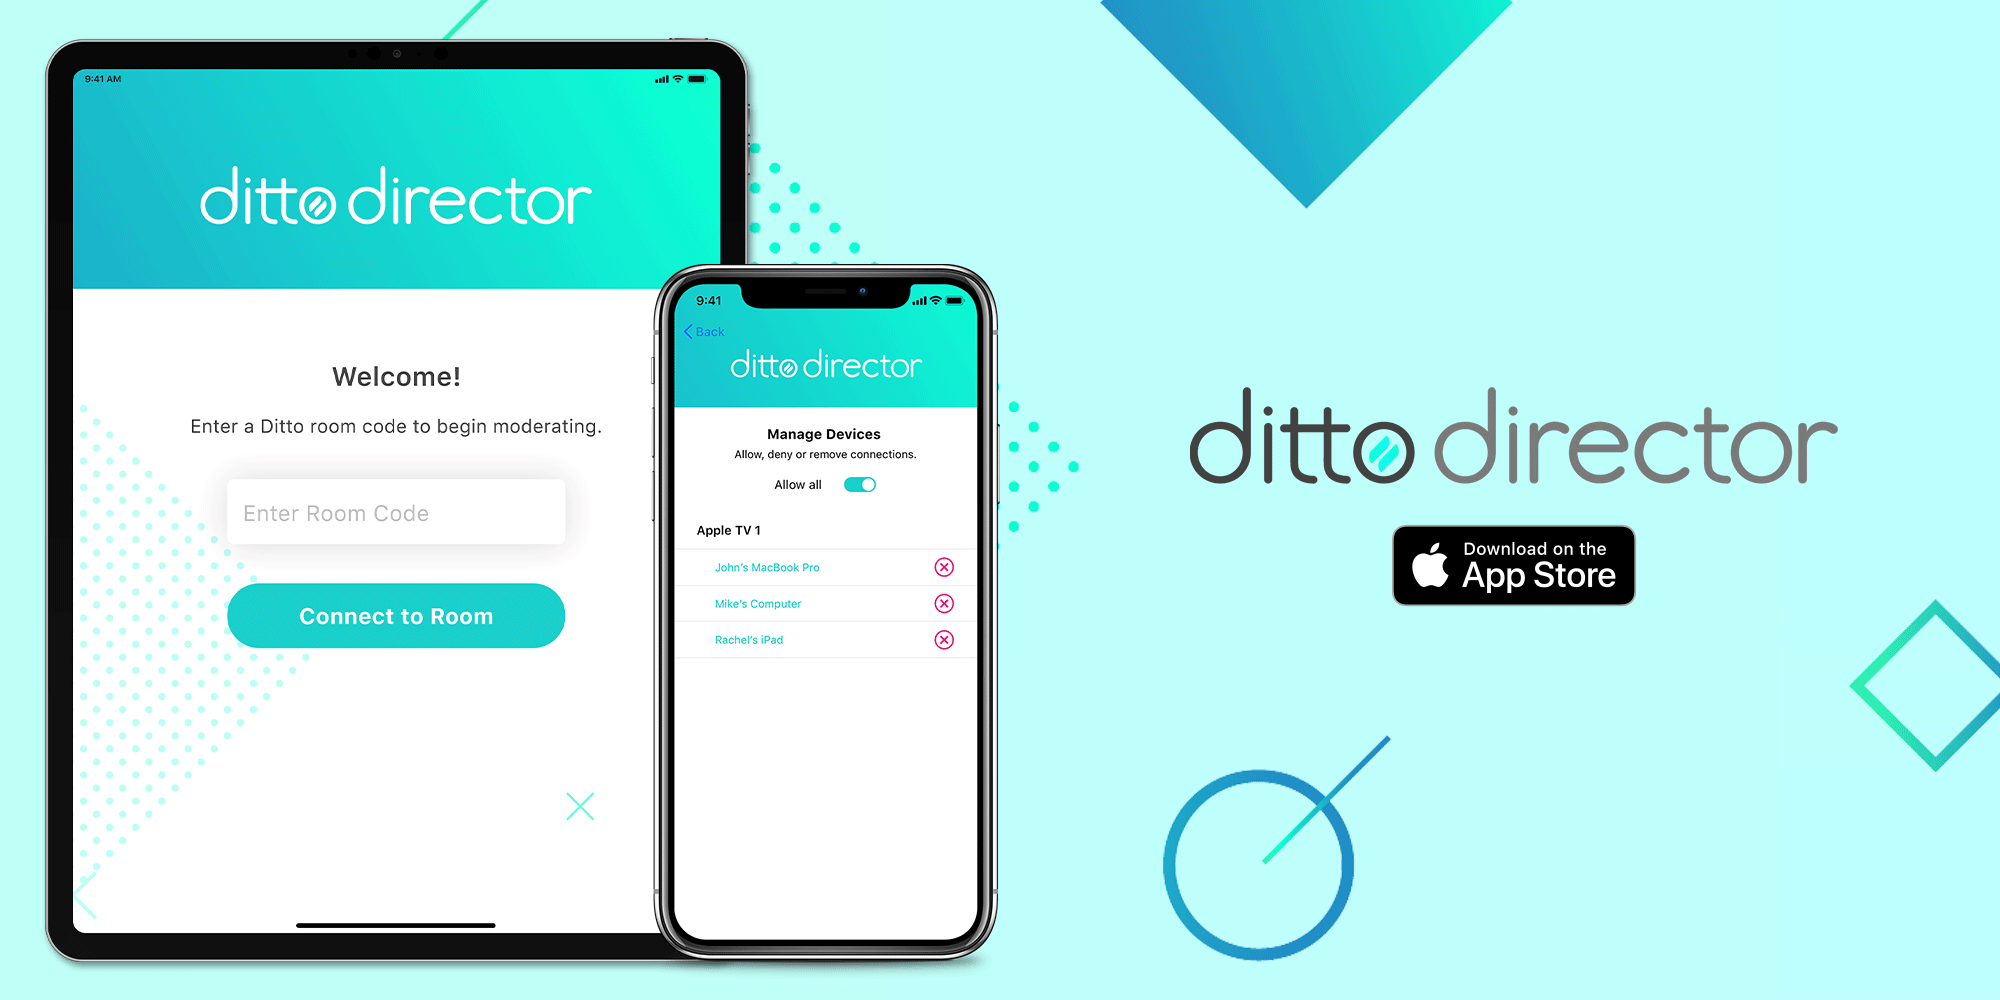 Ditto Director app on iPhone and iPad